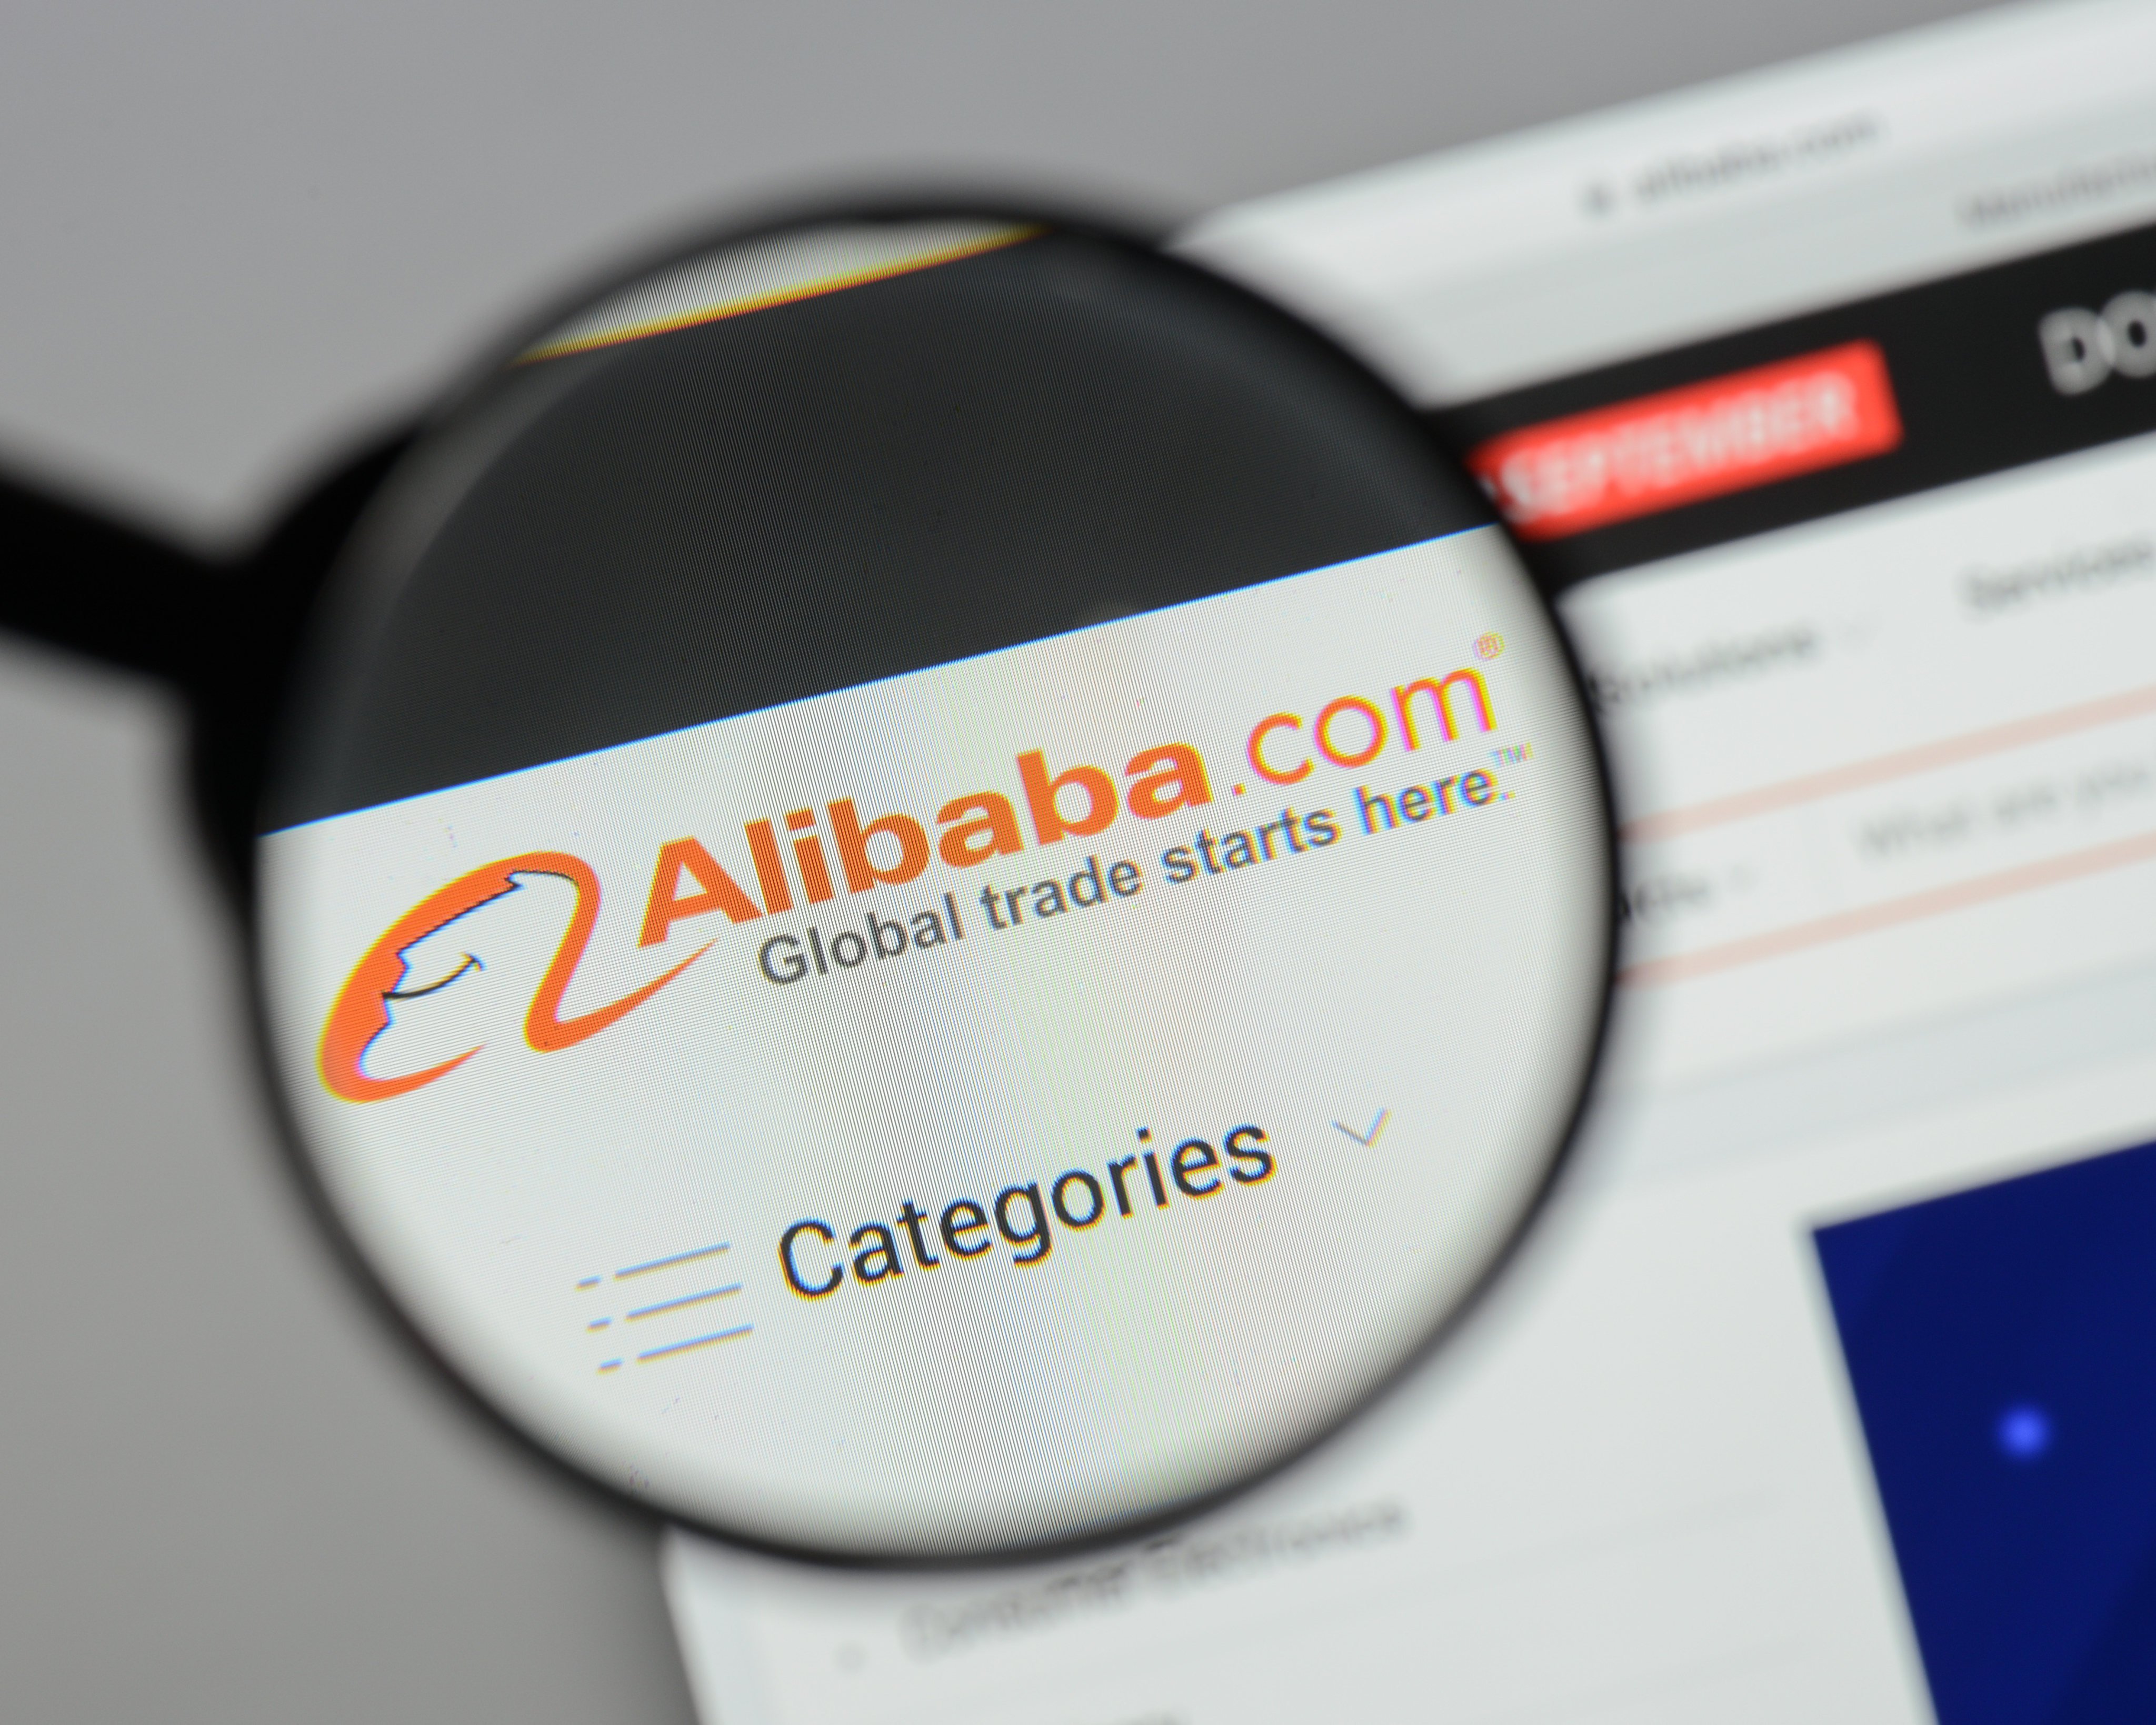 Alibaba is introducing new services including AI-powered features to drive growth on its flagship B2B platform. Photo: Shutterstock